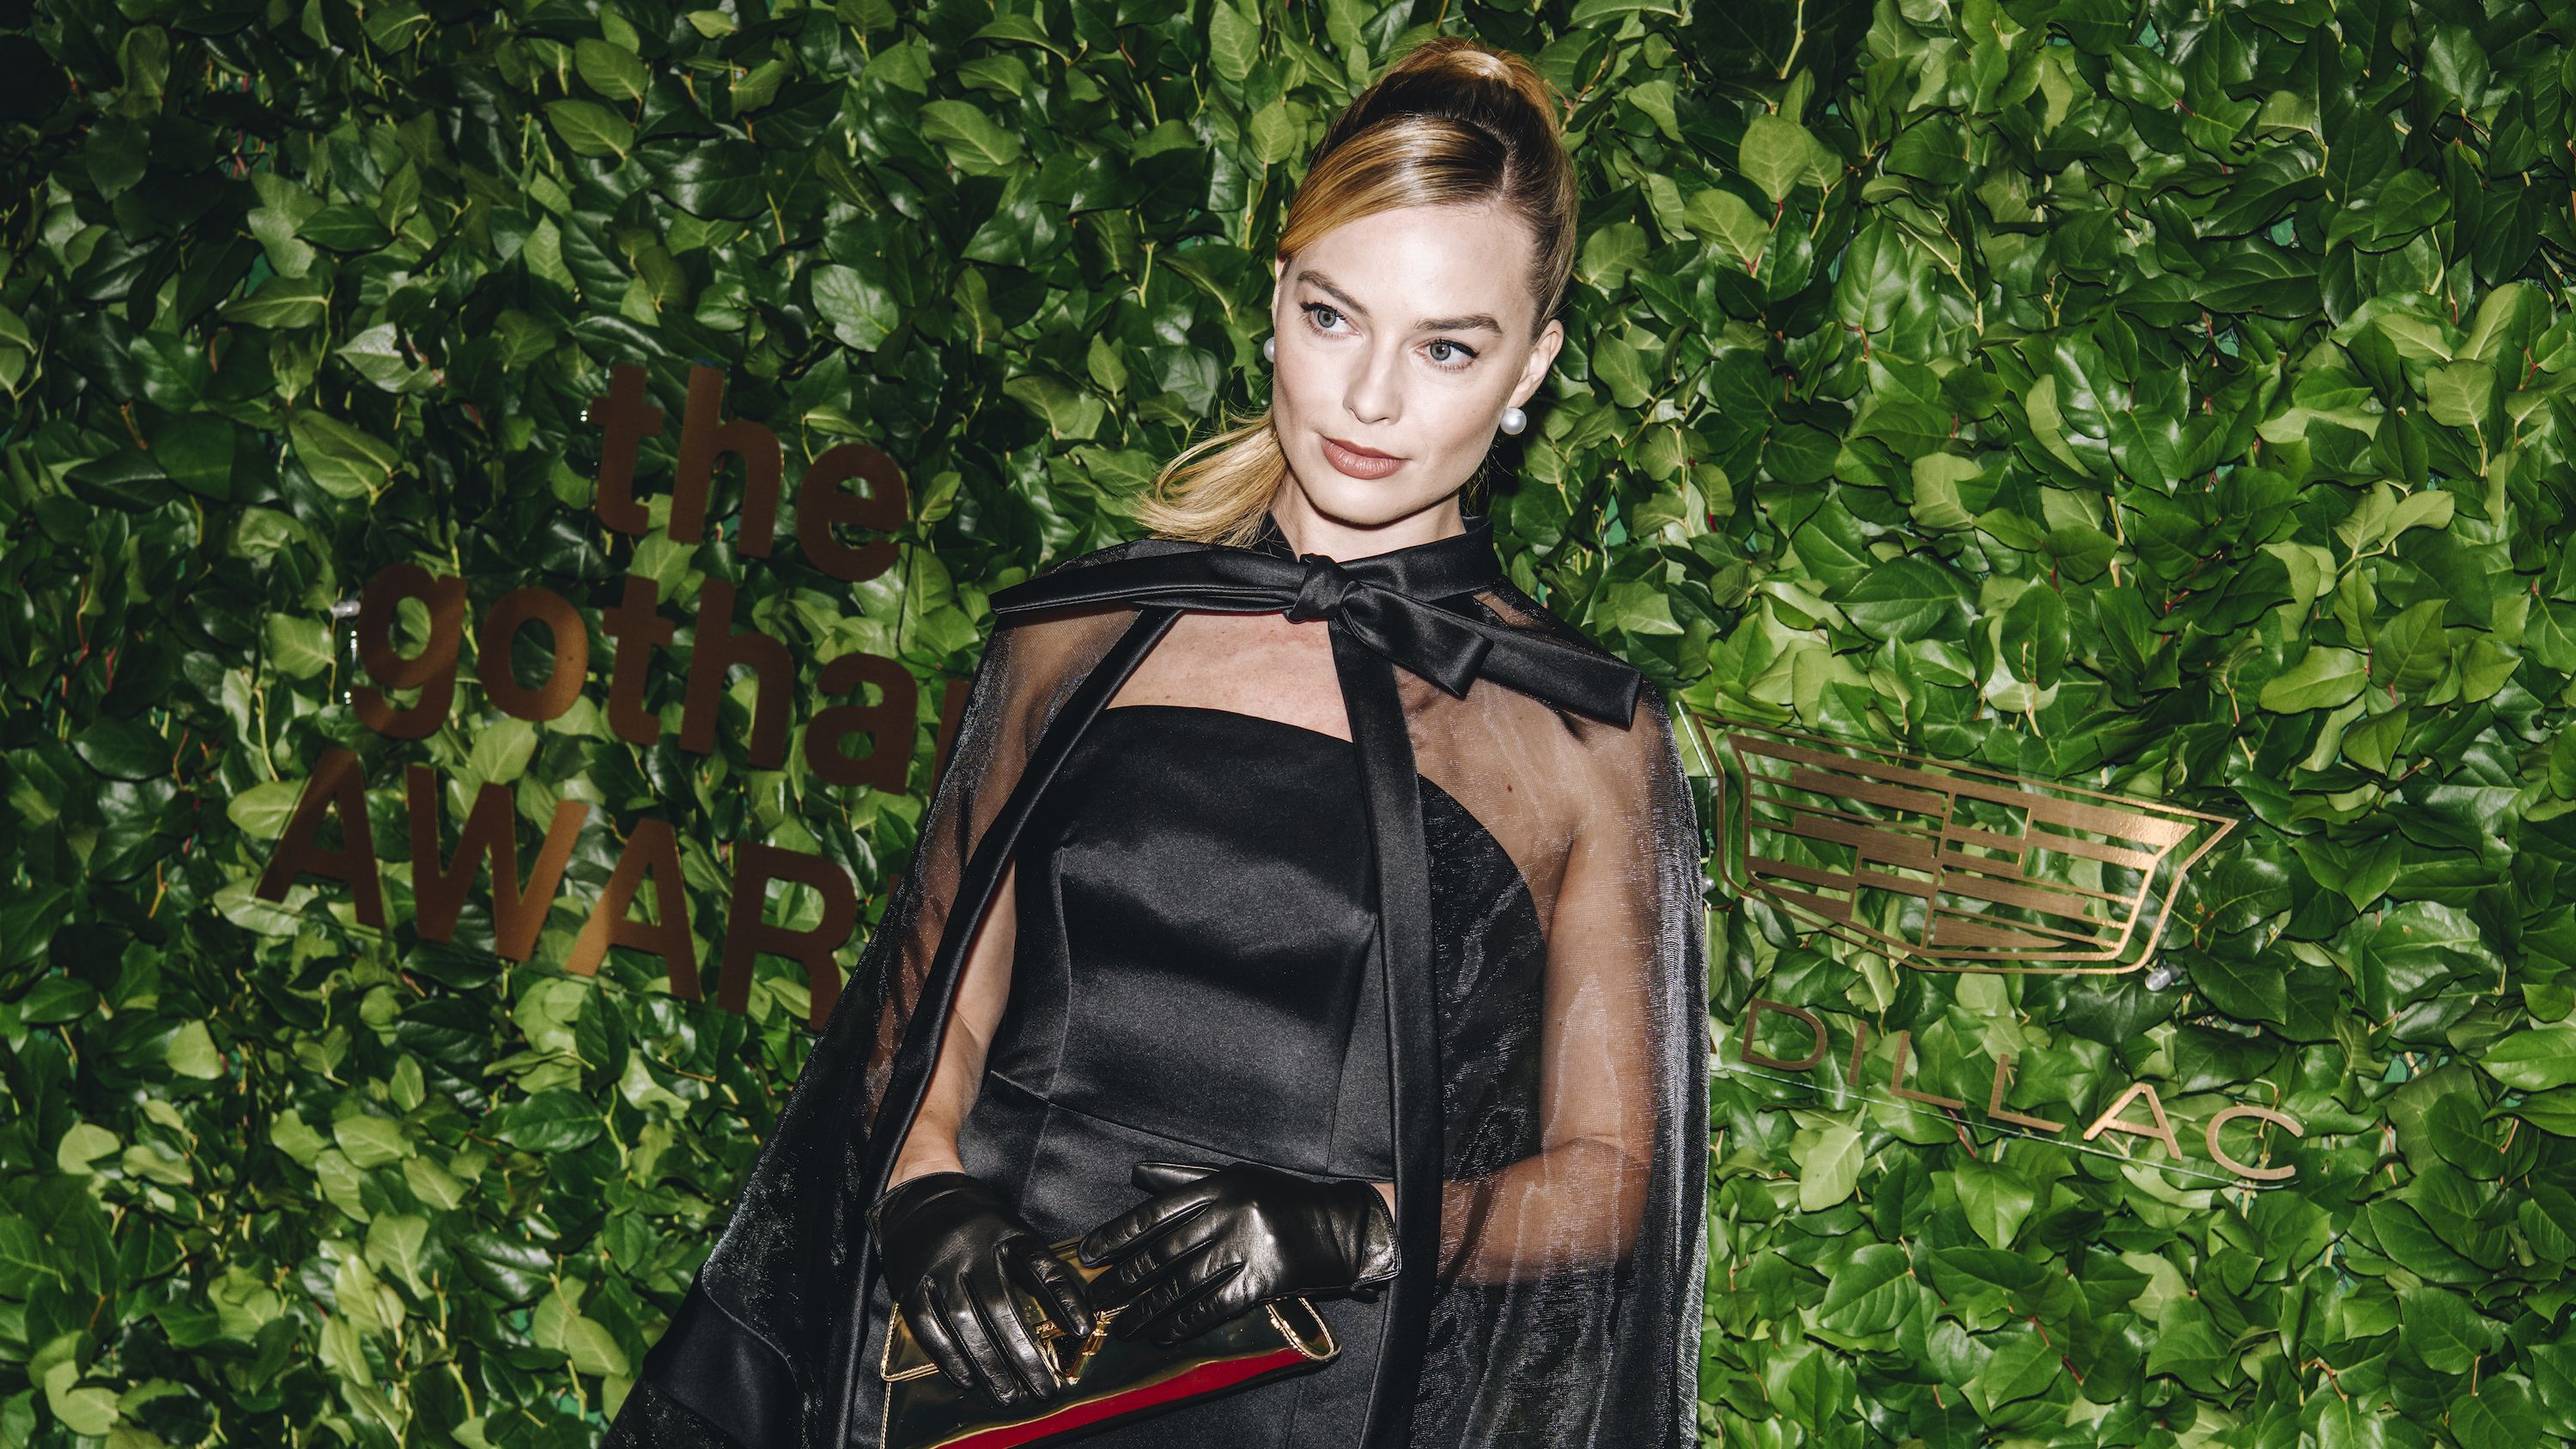 Margot Robbie's Red Carpet Jumpsuit: Gotta Have It or Make It Stop?